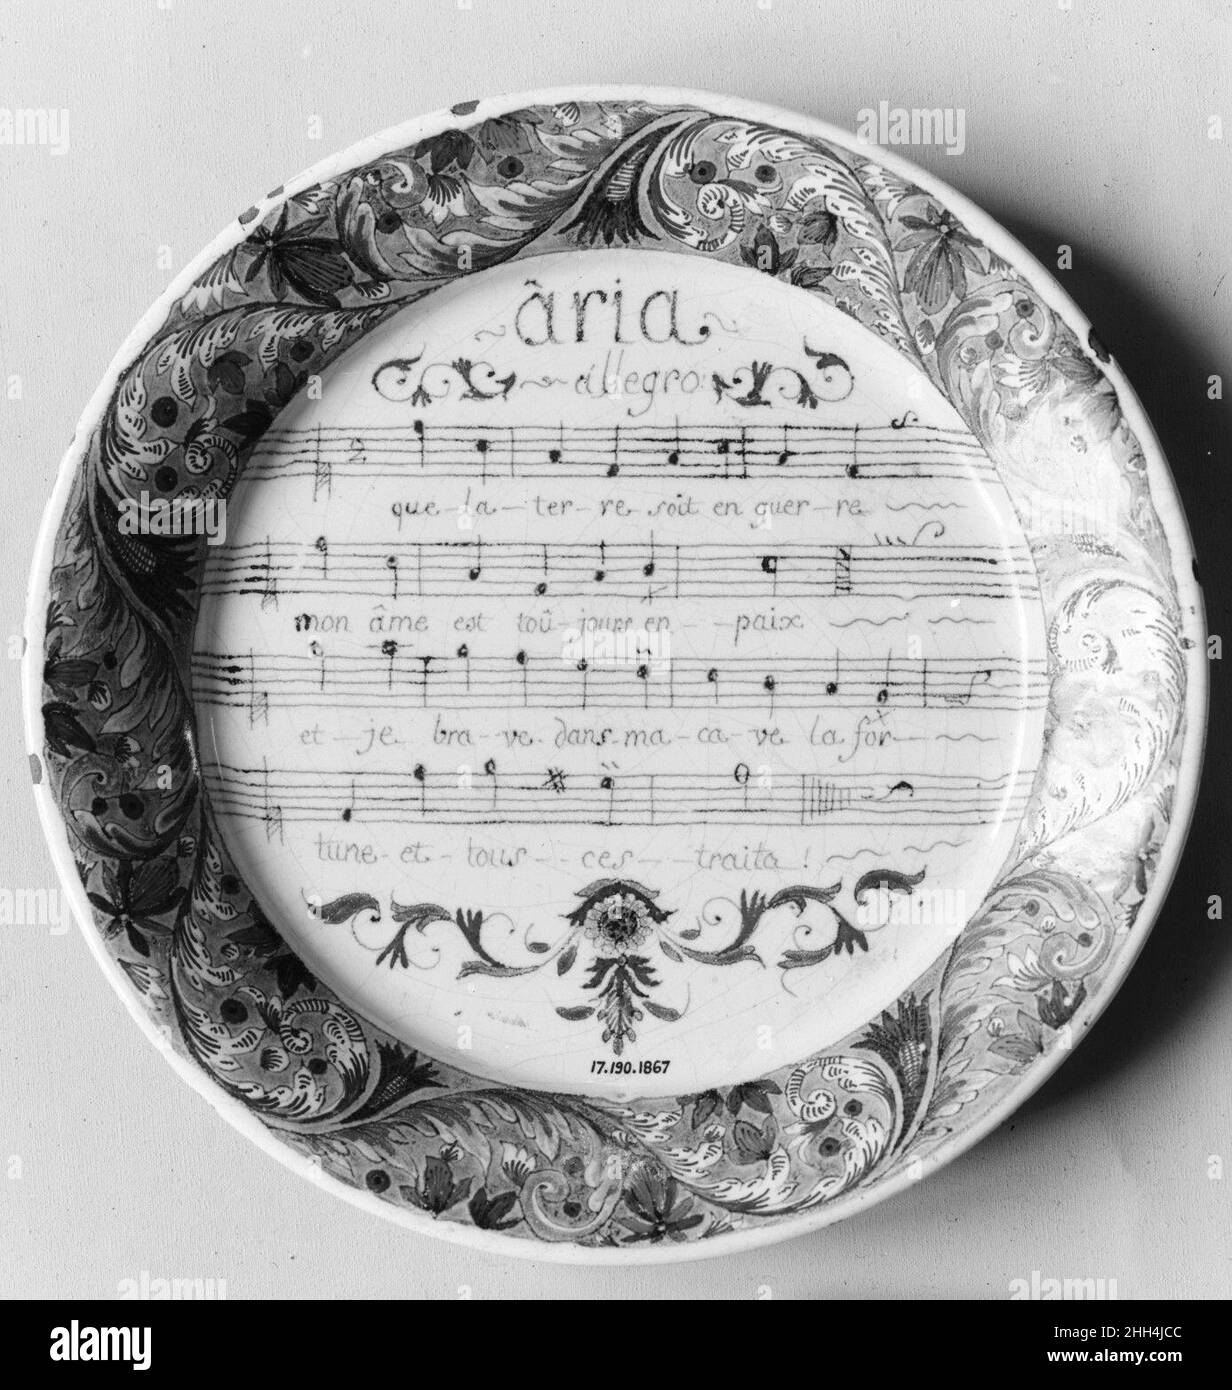 Plate ca. 1740 French, Rouen This plate is made of Rouen ware, a distinctive type of faience, or tin-enameled earthenware, produced in the Norman city of Rouen from the fifteenth century through the eighteenth. The elaborate border of floral scrolls on this example surrounds four staves of music simply titled 'Aria.' Although the opera for which the piece was composed has not been identified, its lyric is suited to the pastoral comic genre that was popular in France in the early eighteenth century. It translates as follows: 'Though the world be at war, my soul is still at peace, and in my cave Stock Photo